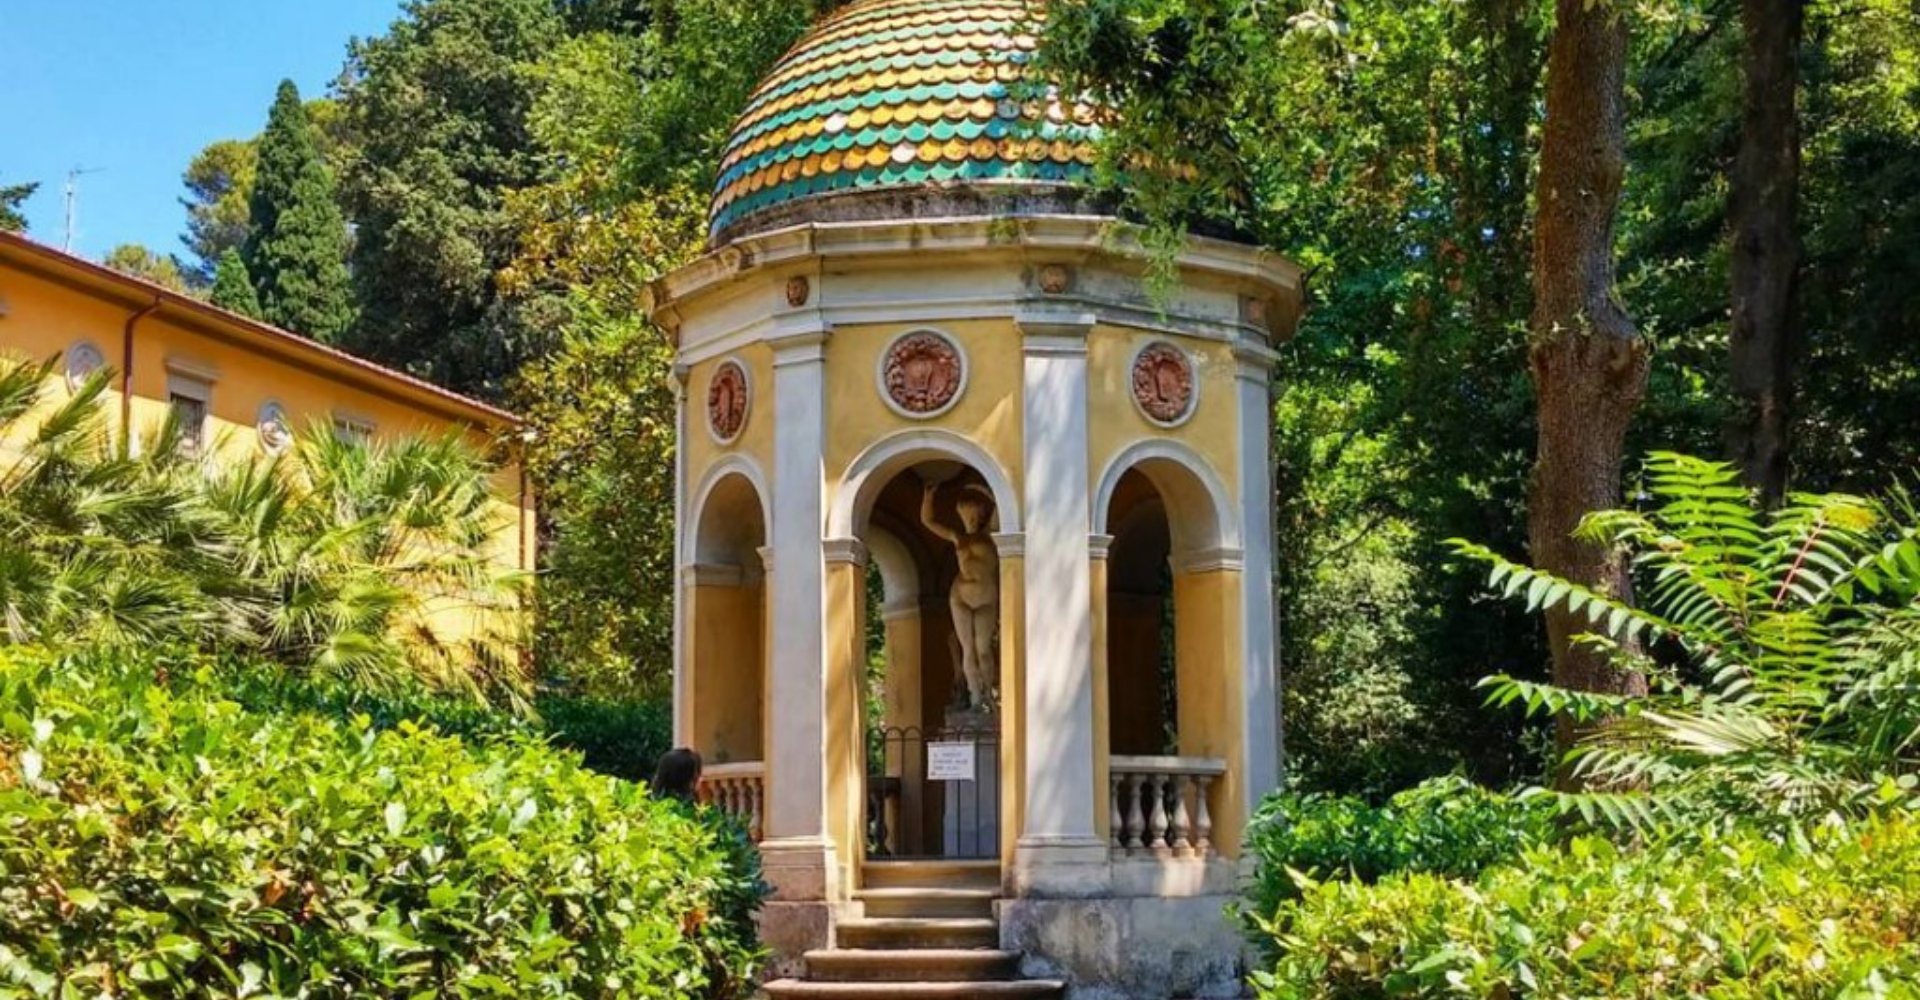 One of the beautiful temples you can admire within the Stibbert Garden